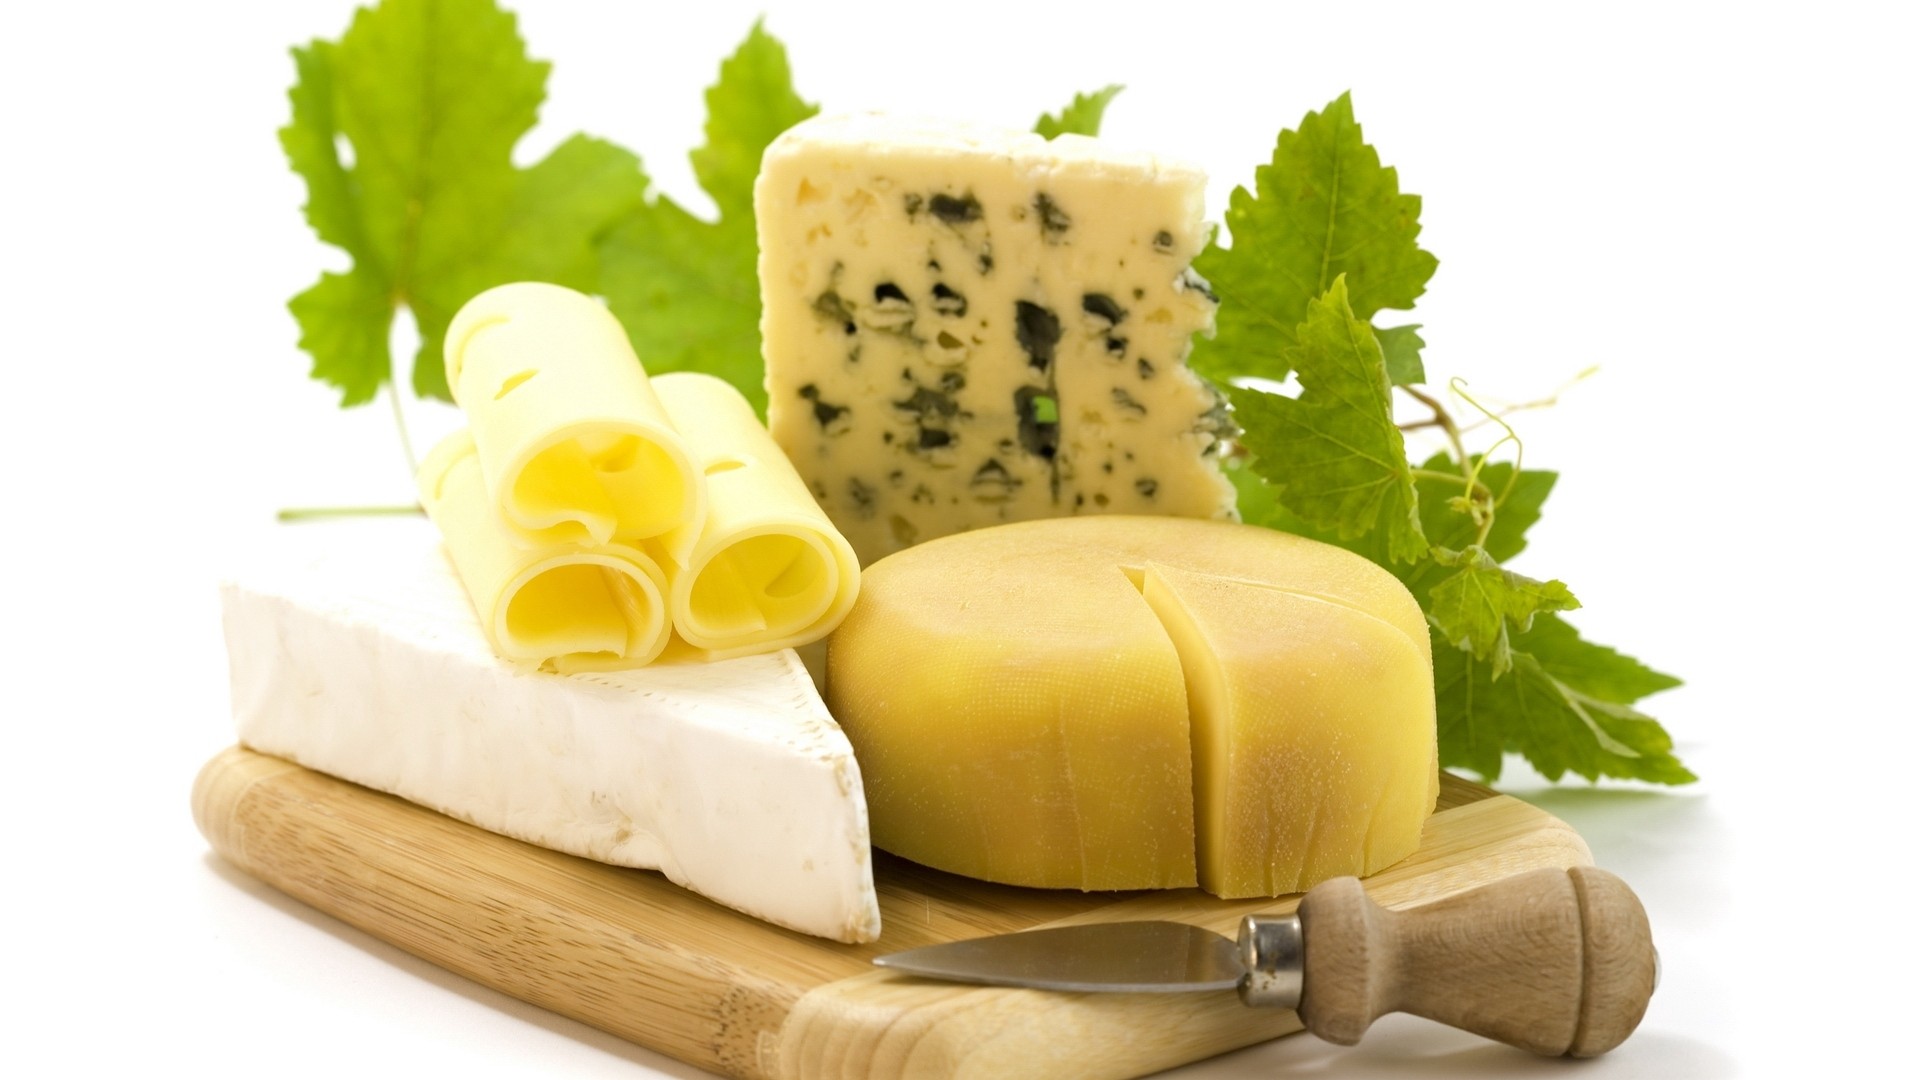 Cheese Wallpaper Download